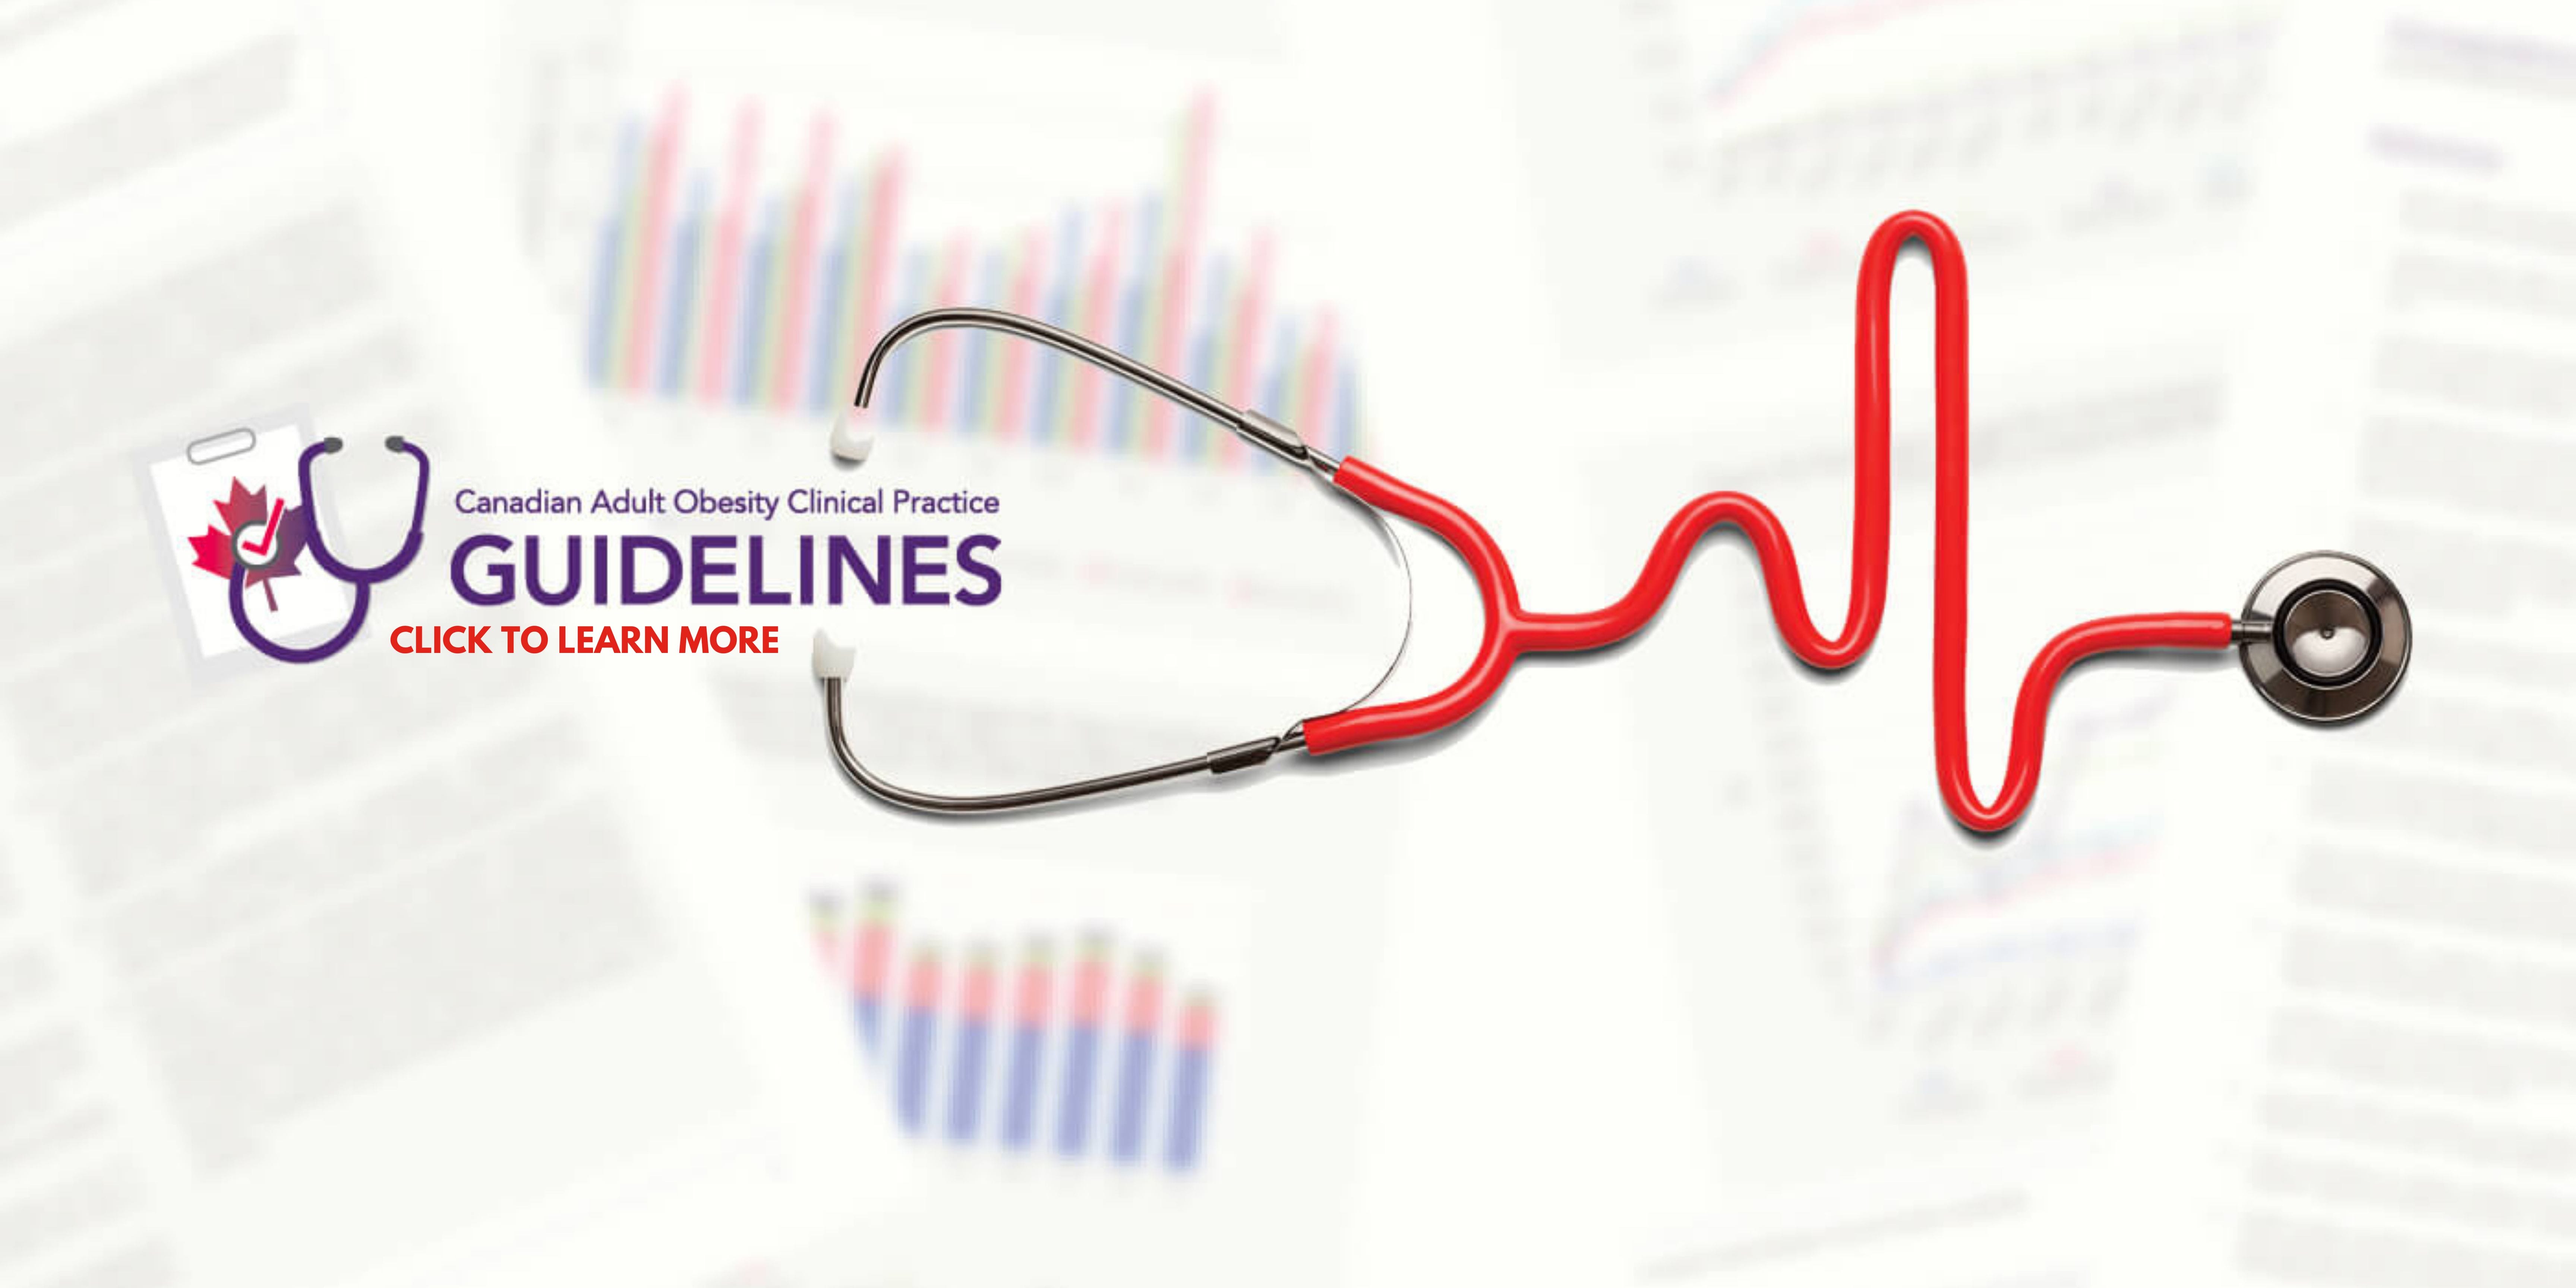 A stethoscope shaped like a heartbeat waveform over a background featuring blurred text and graphs, with a logo for canadian adult obesity clinical practice guidelines.